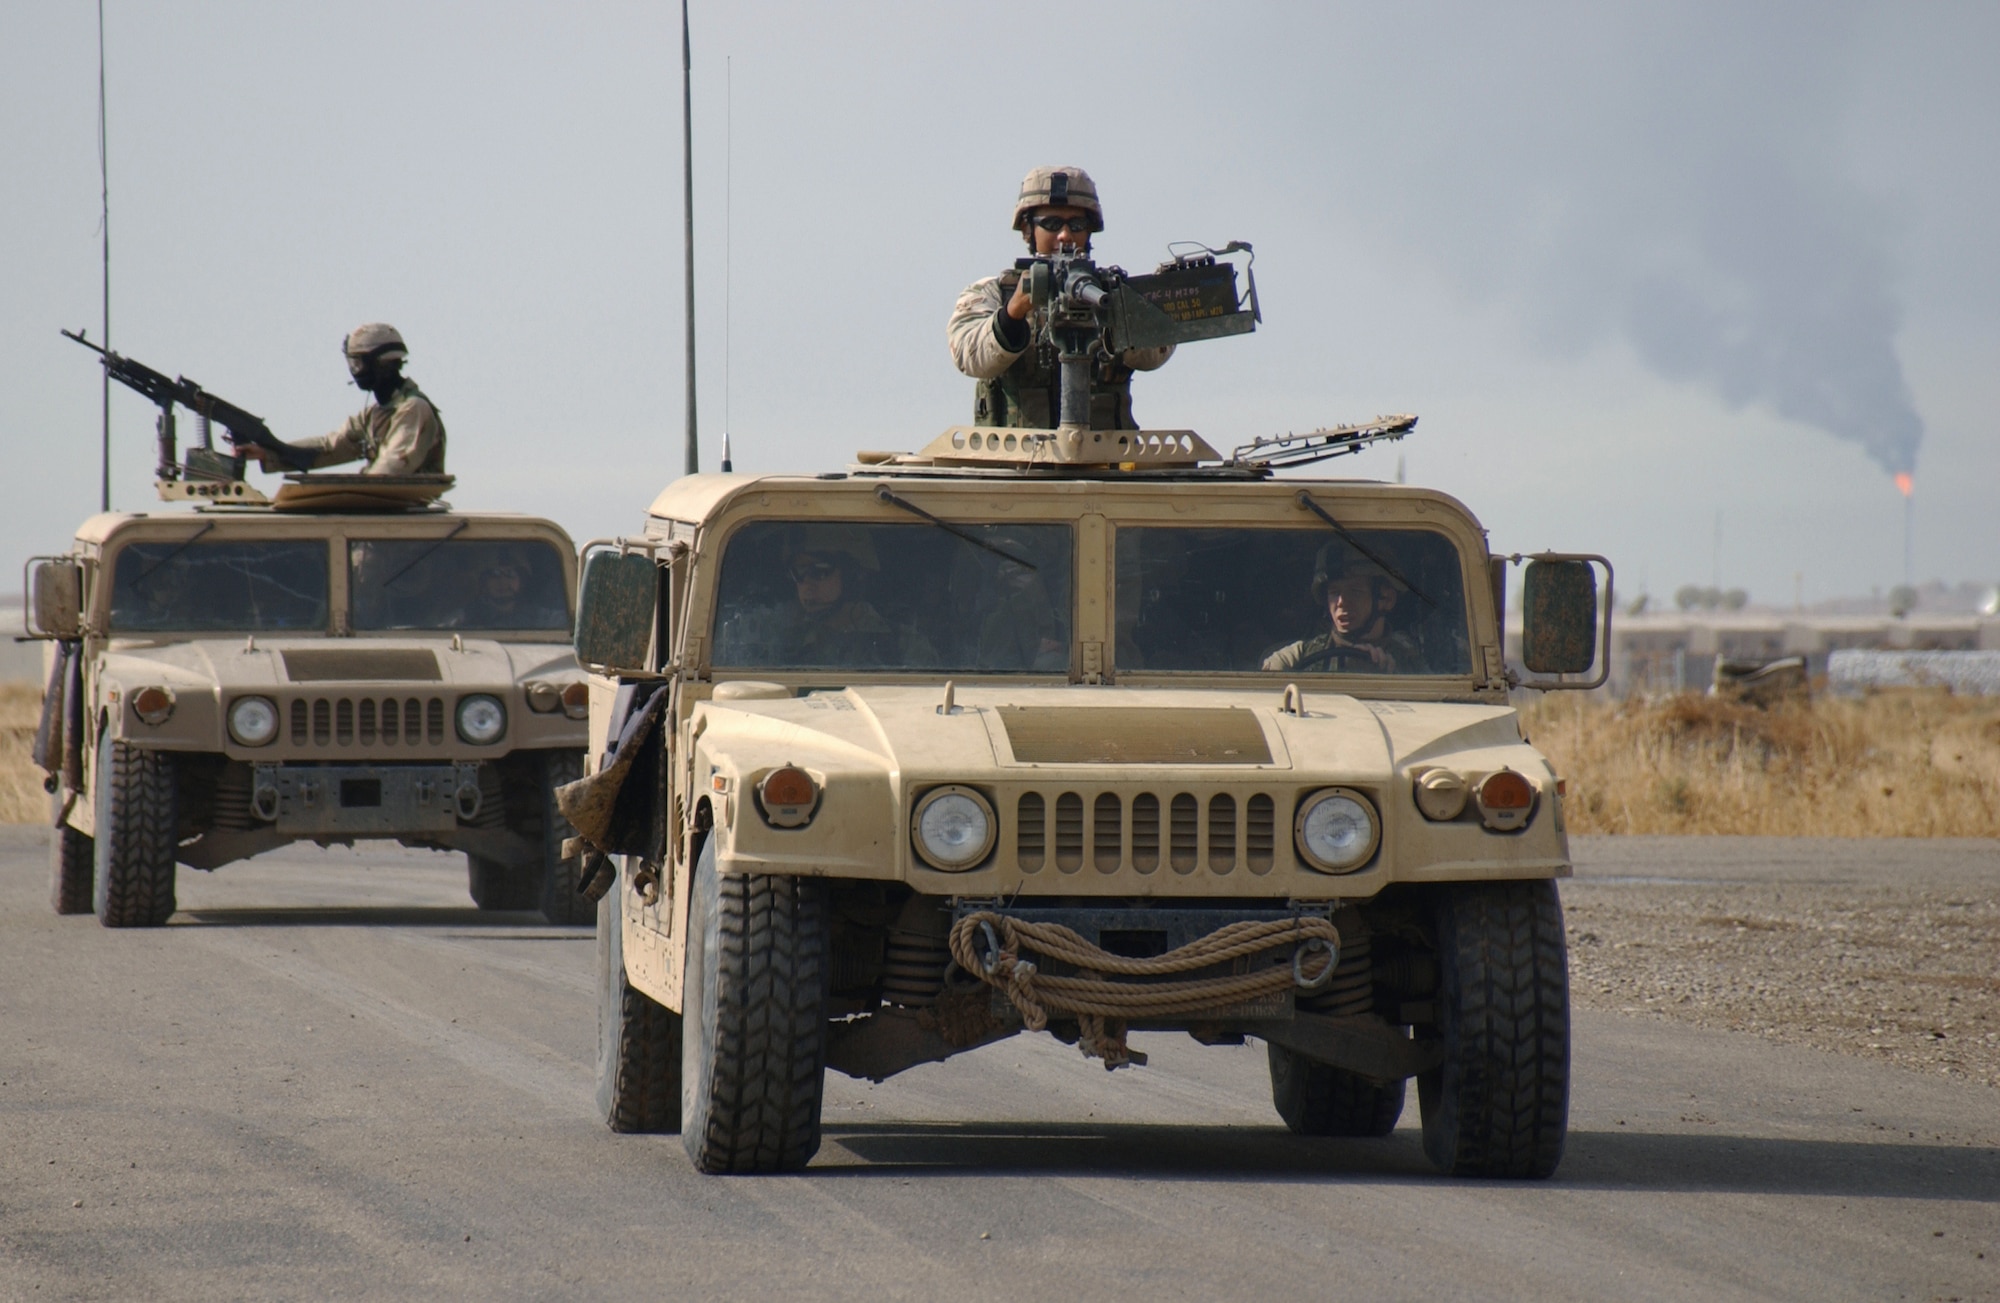 KARSHI-KHANABAD AIR BASE, Uzbekistan -- Security forces ride in Humvees to conduct mounted and dismounted foot patrols through local villages.  (U.S. Air Force photo by Staff Sgt. Adrian Cadiz)